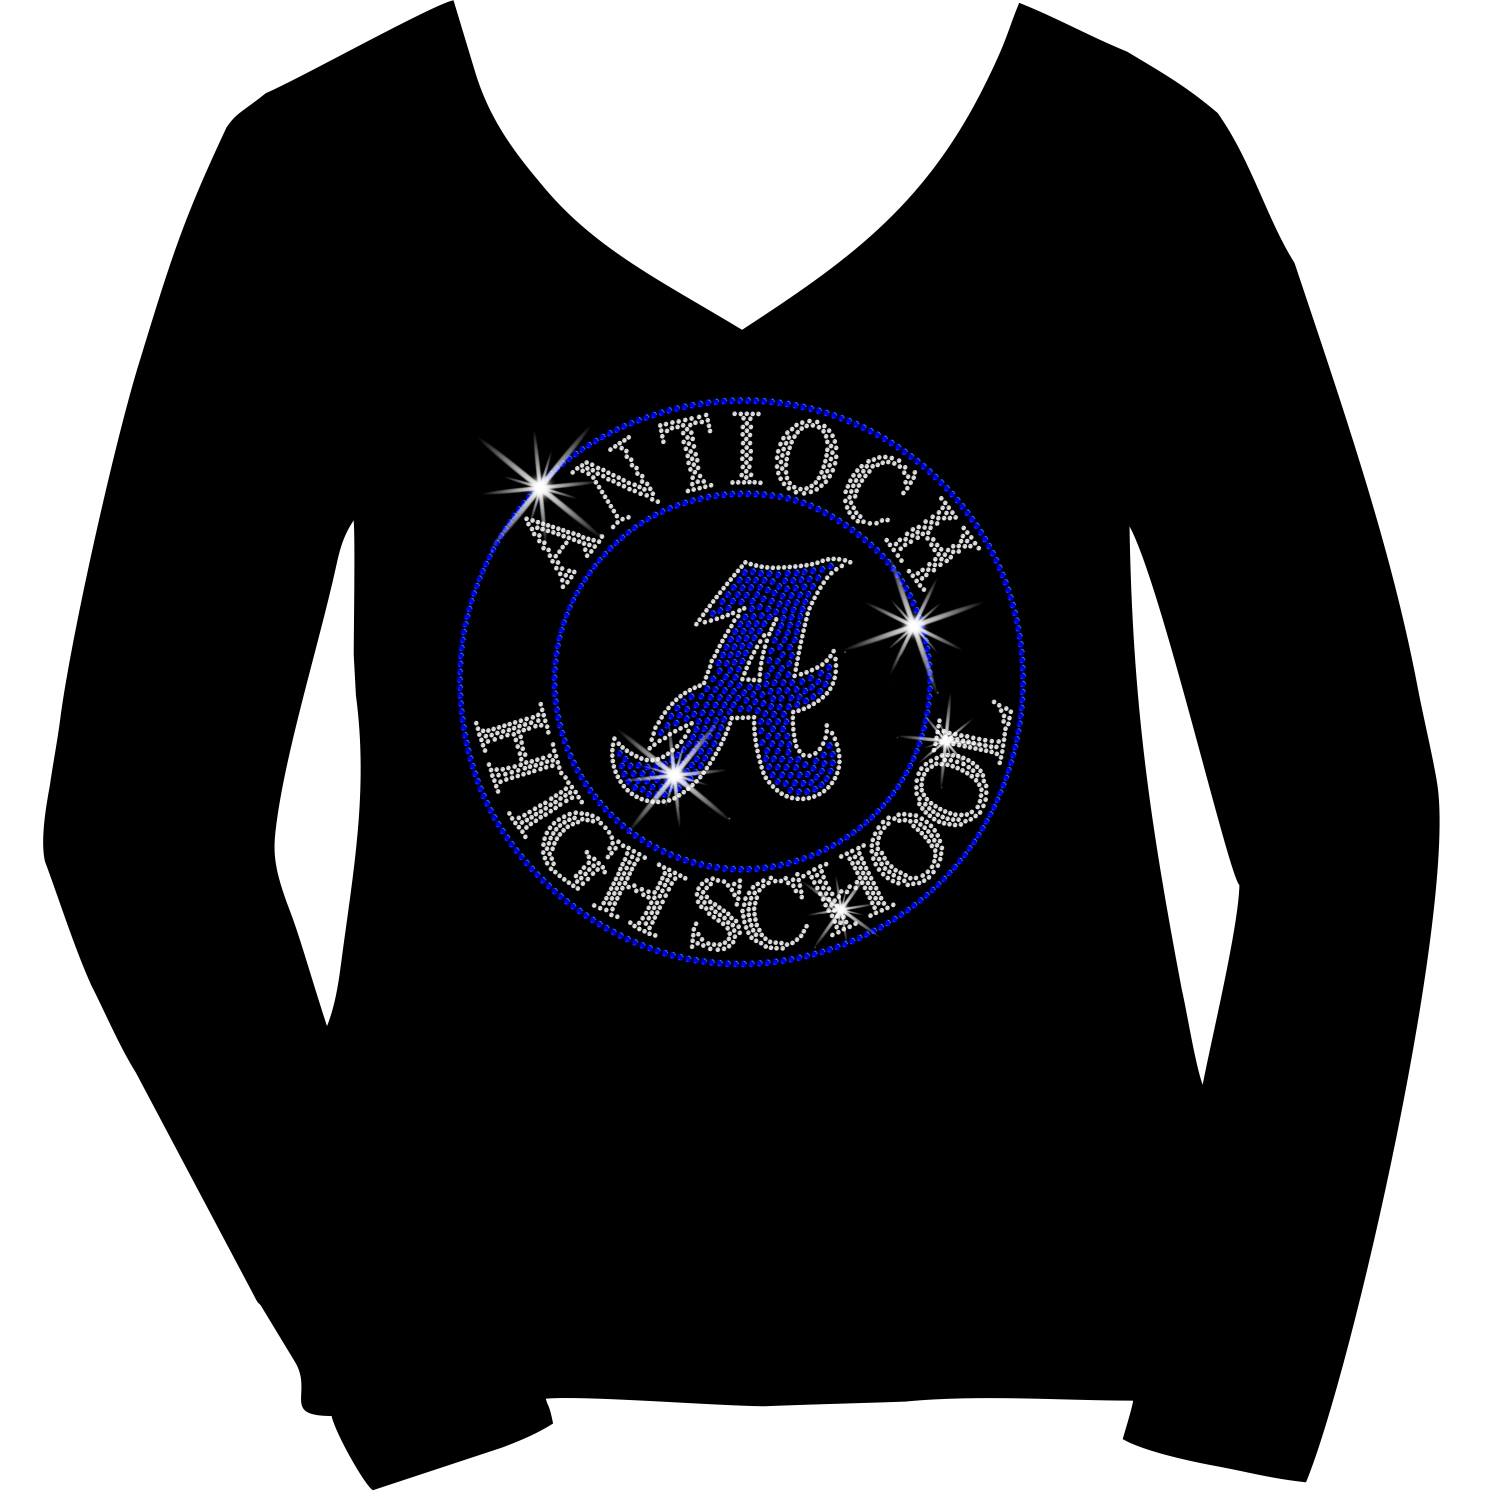 Antioch High School Holographic Spangle Sparkle Bling Shirt, tank or hoodie-LS Shirt, SS Shirt, Racerback tank and hoodie-Becky's Boutique-XS-Long Sleeve V-Neck-Black-Beckys-Boutique.com